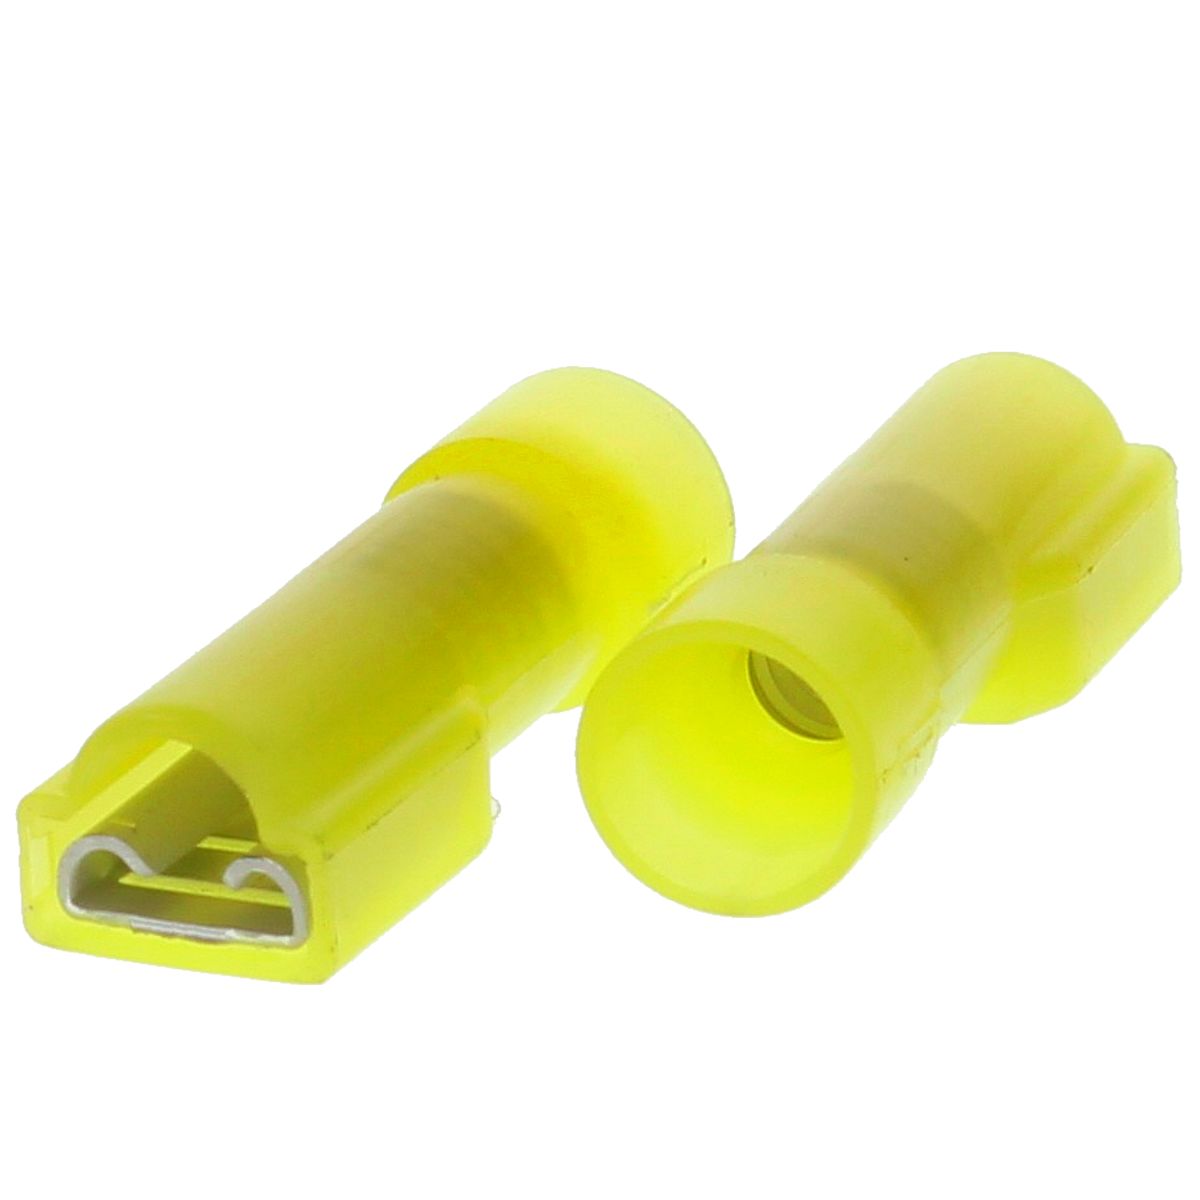 12-10 AWG Yellow Nylon Fully Insulated (.250"/6.35 mm) Female Quick Connectors, 50/PKG